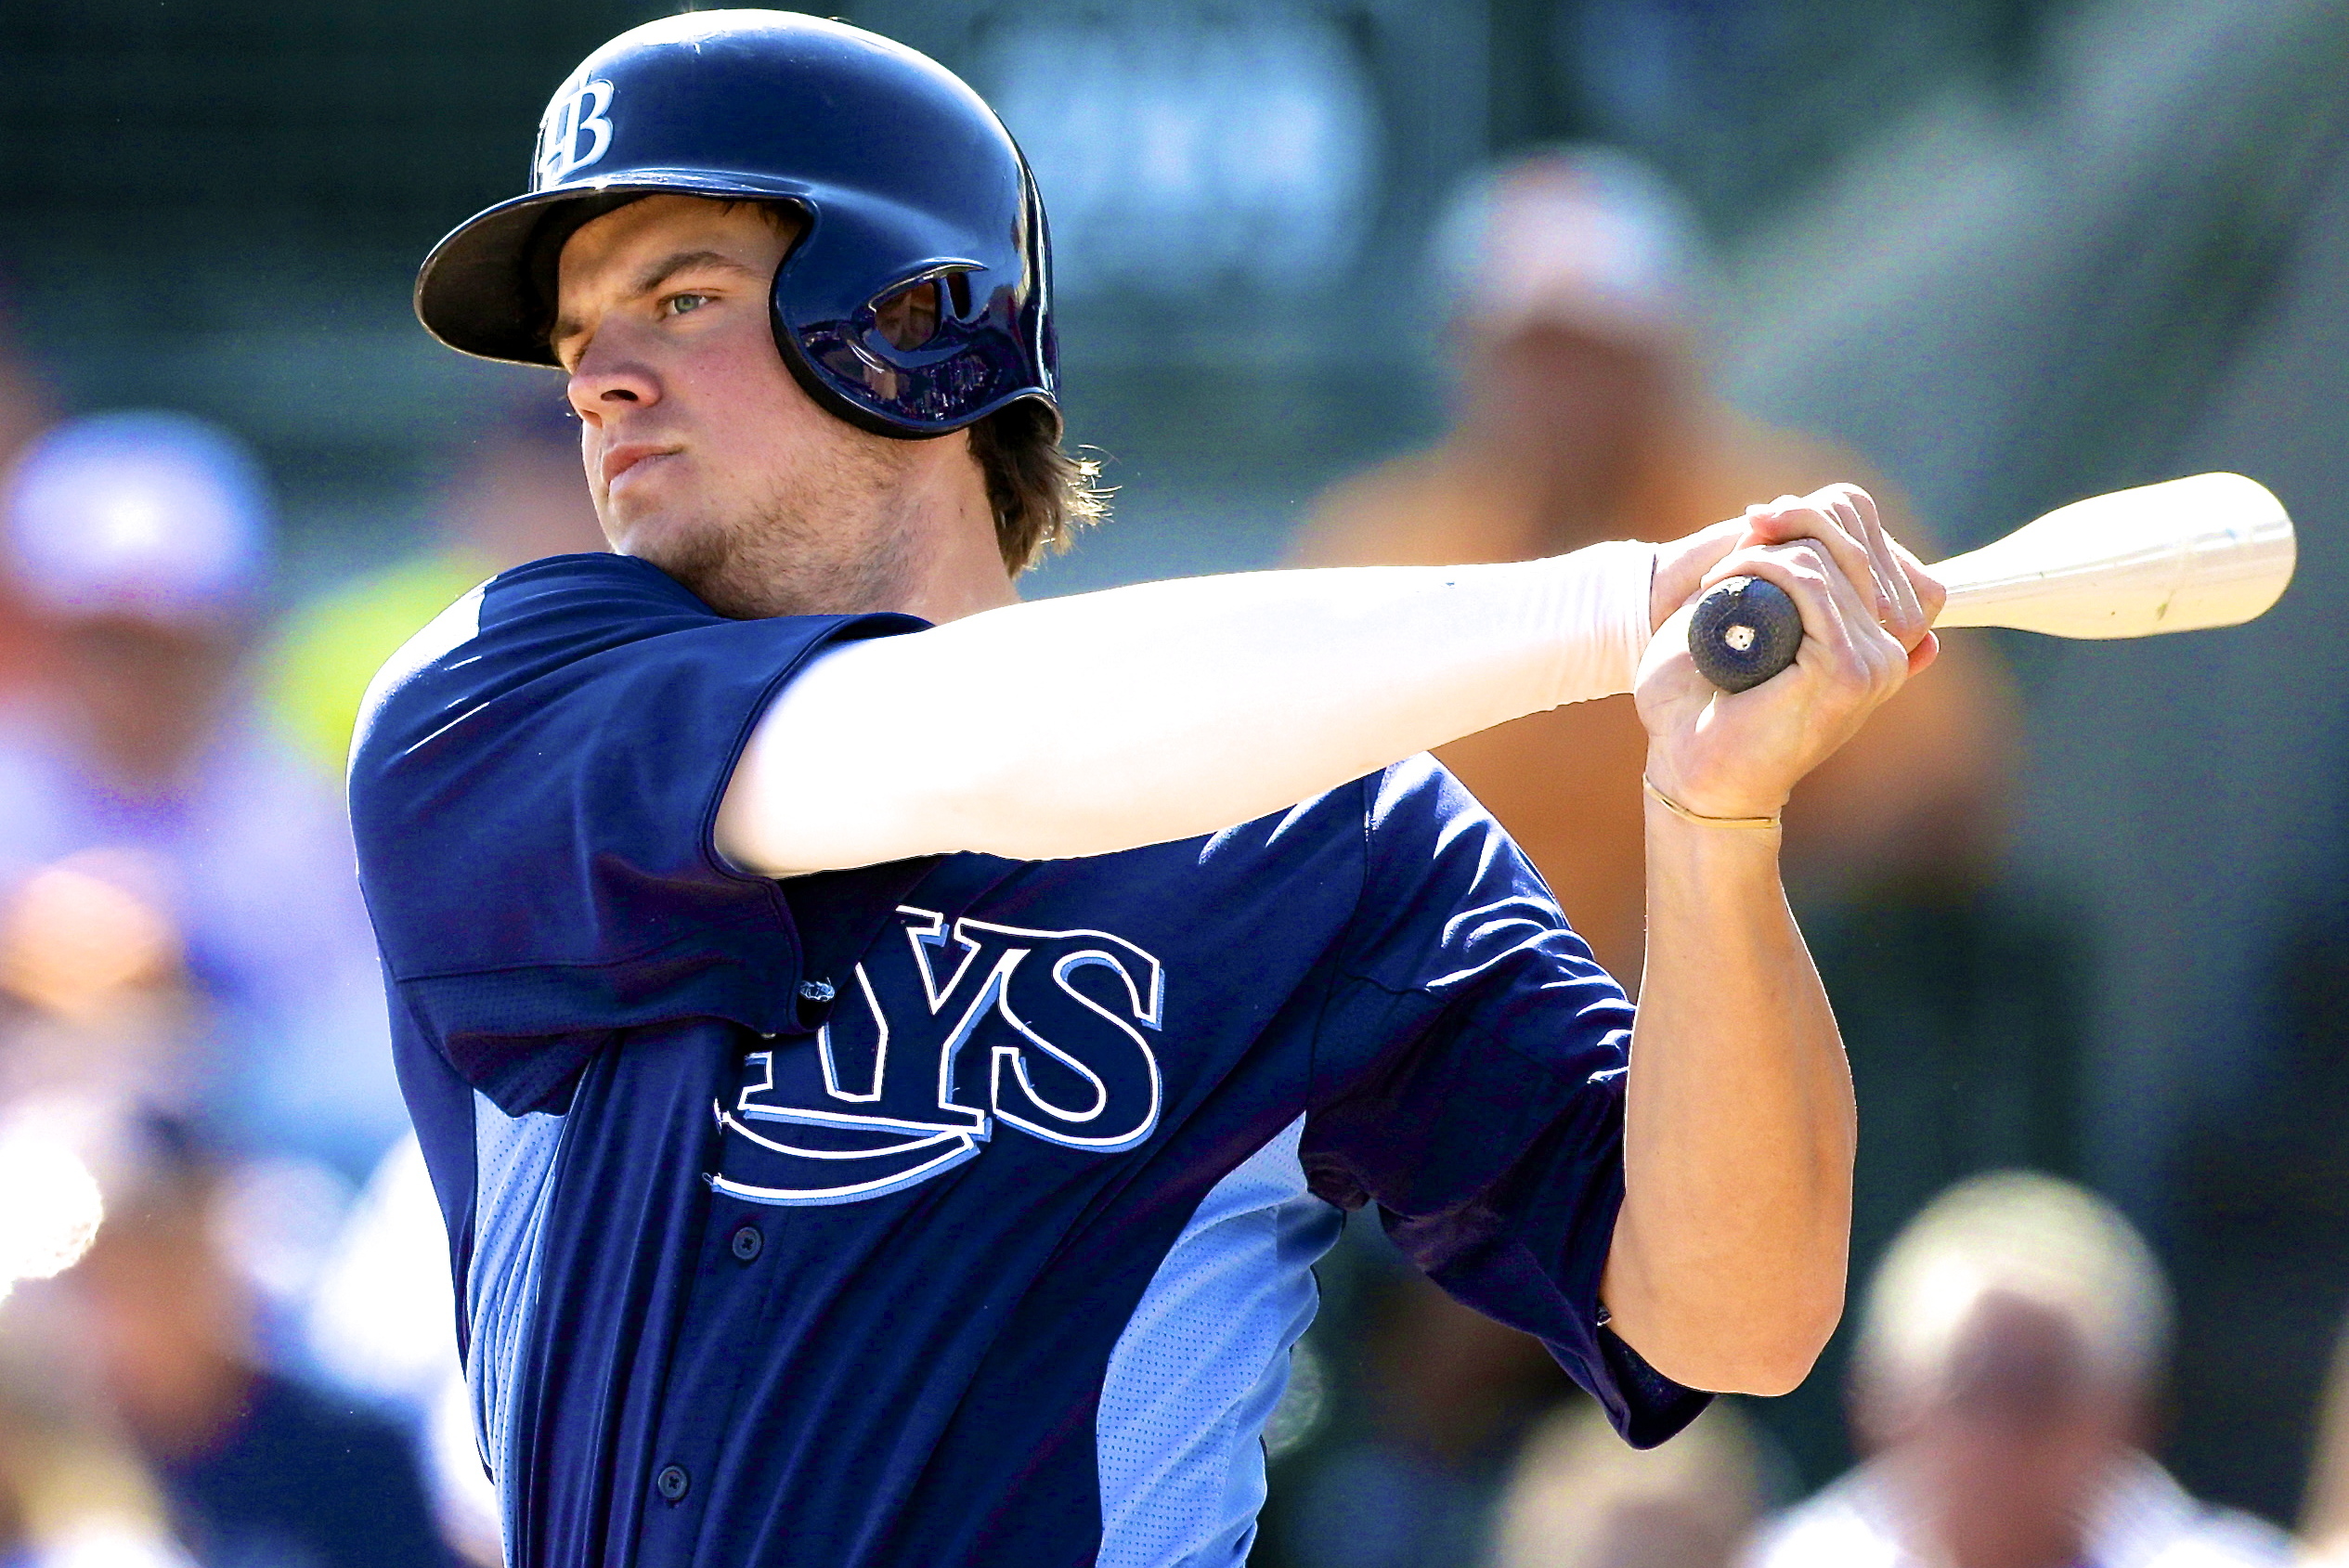 Why Wil Myers Is Hyped as MLB's Next Great Hitting Stud